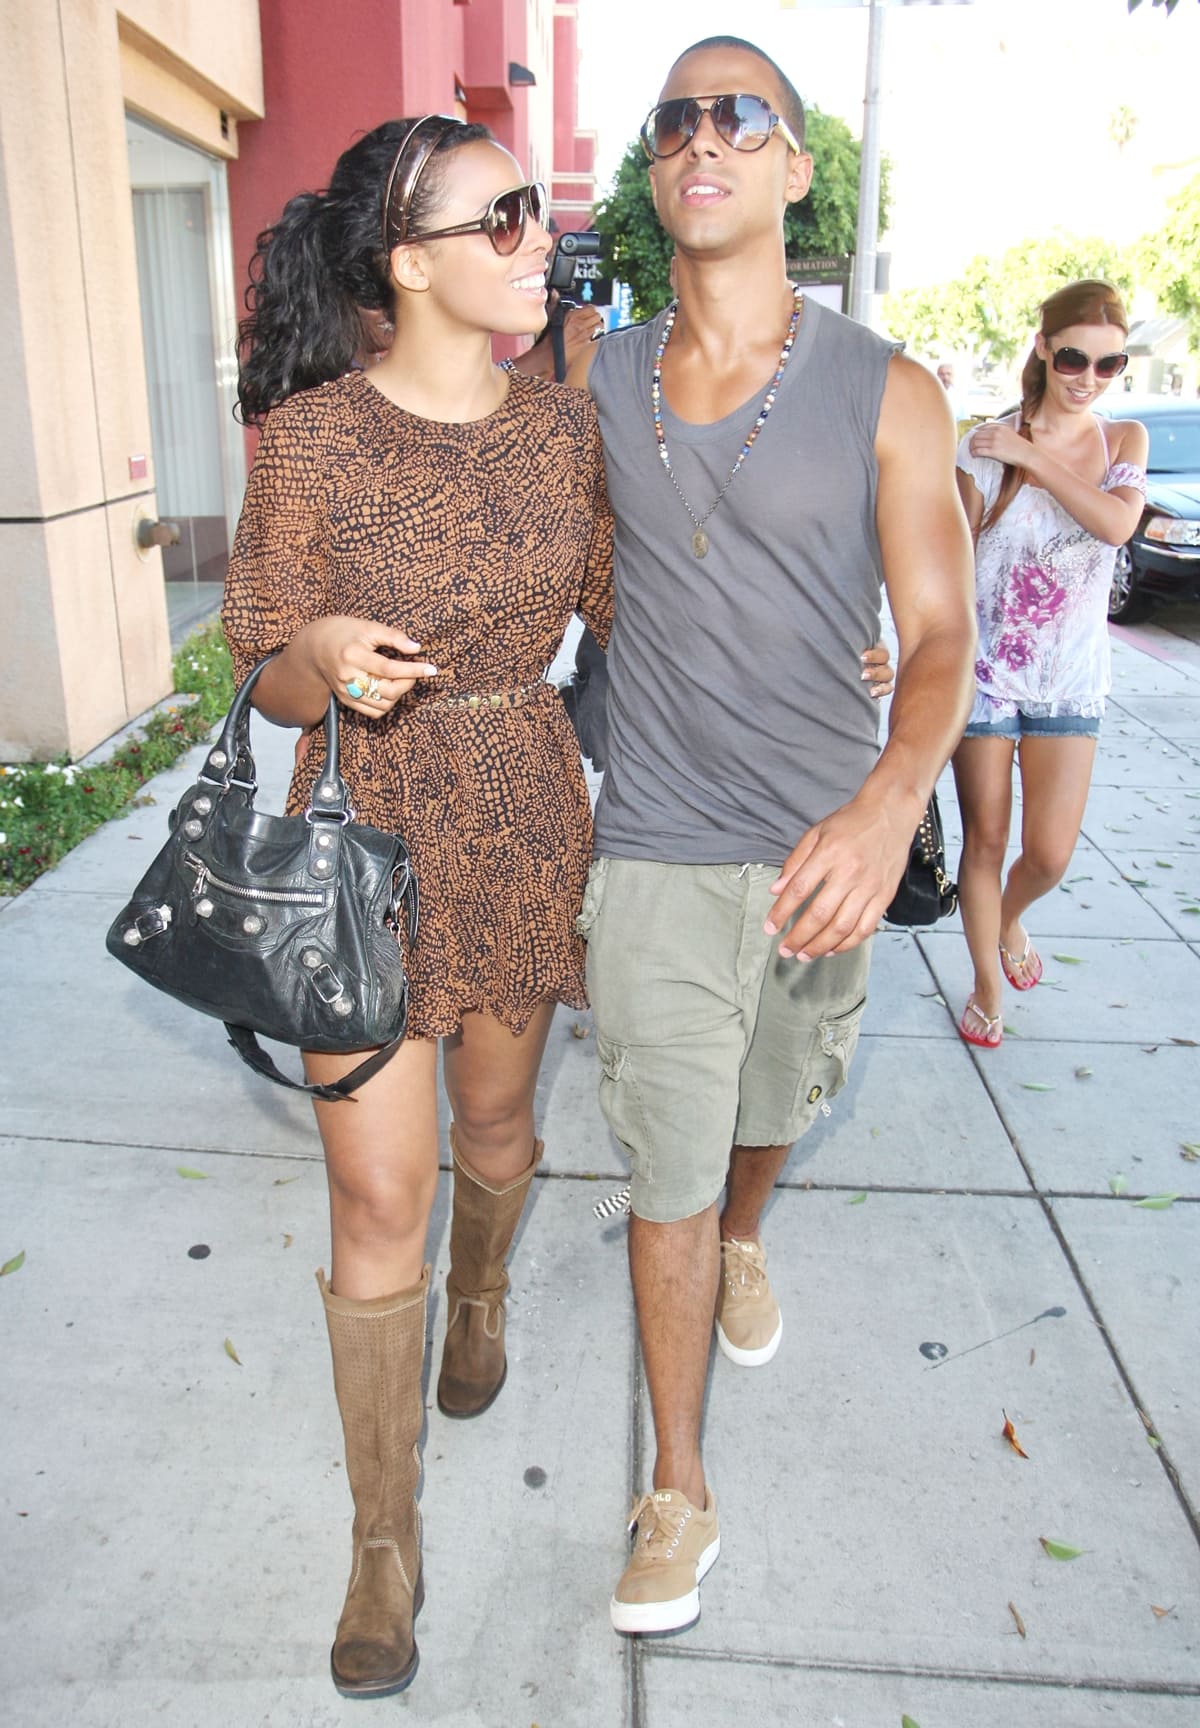 Rochelle Wiseman, also known as Rochelle Humes, and Marvin Humes were spotted indulging in some retail therapy at Lisa Kline on Robertson Boulevard in Los Angeles, California, on August 24, 2010